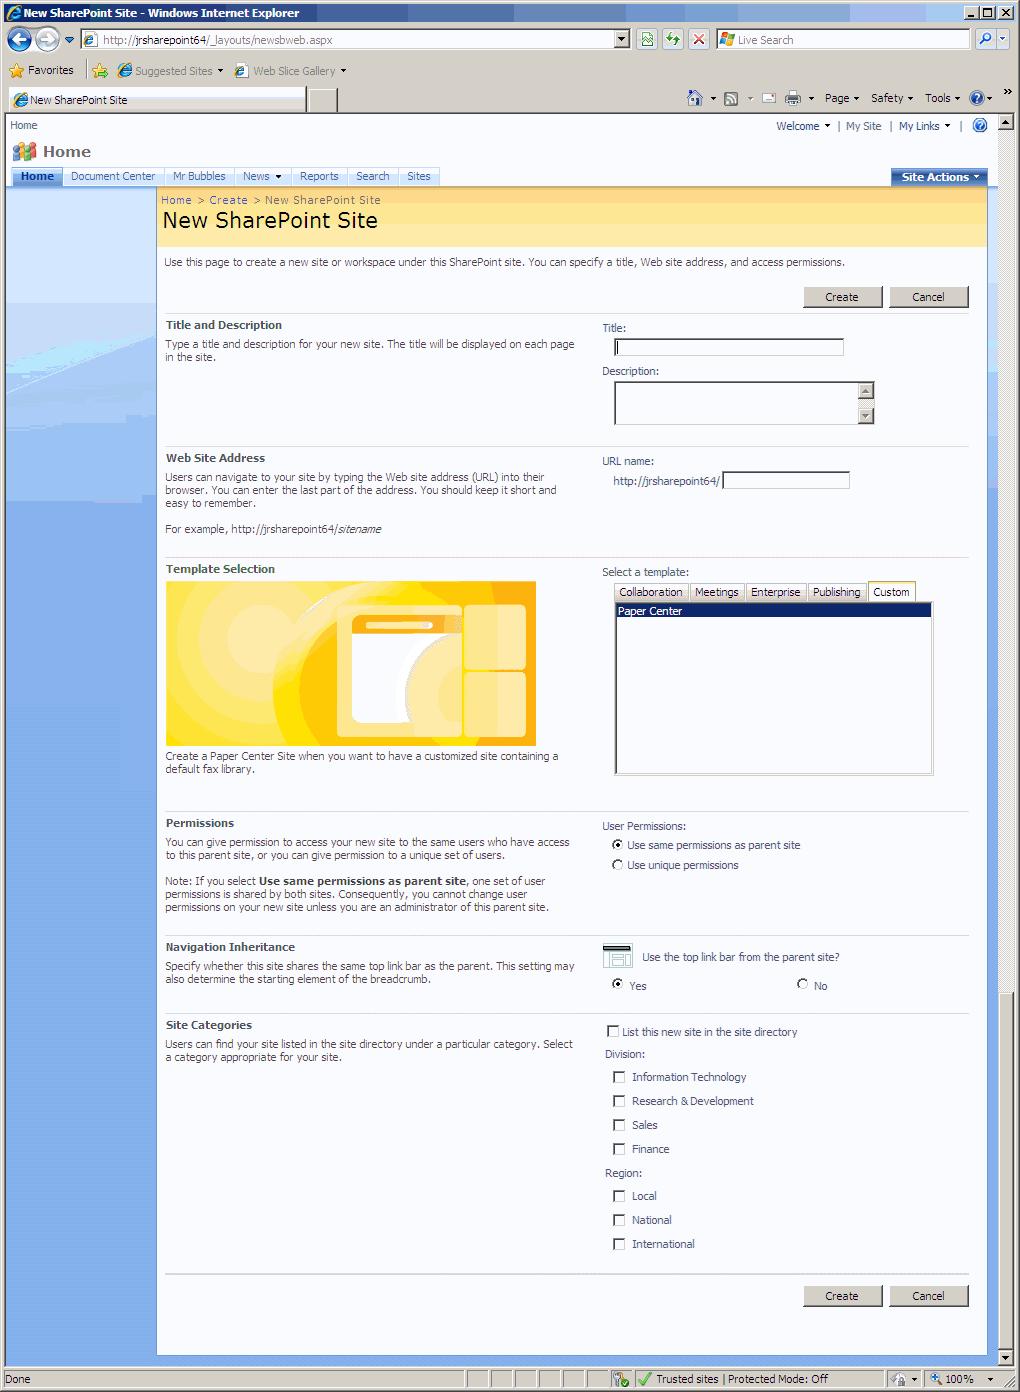 OpenText RightFax 10.0 Connector for Microsoft SharePoint 2007 Administrator Guide 16 7.